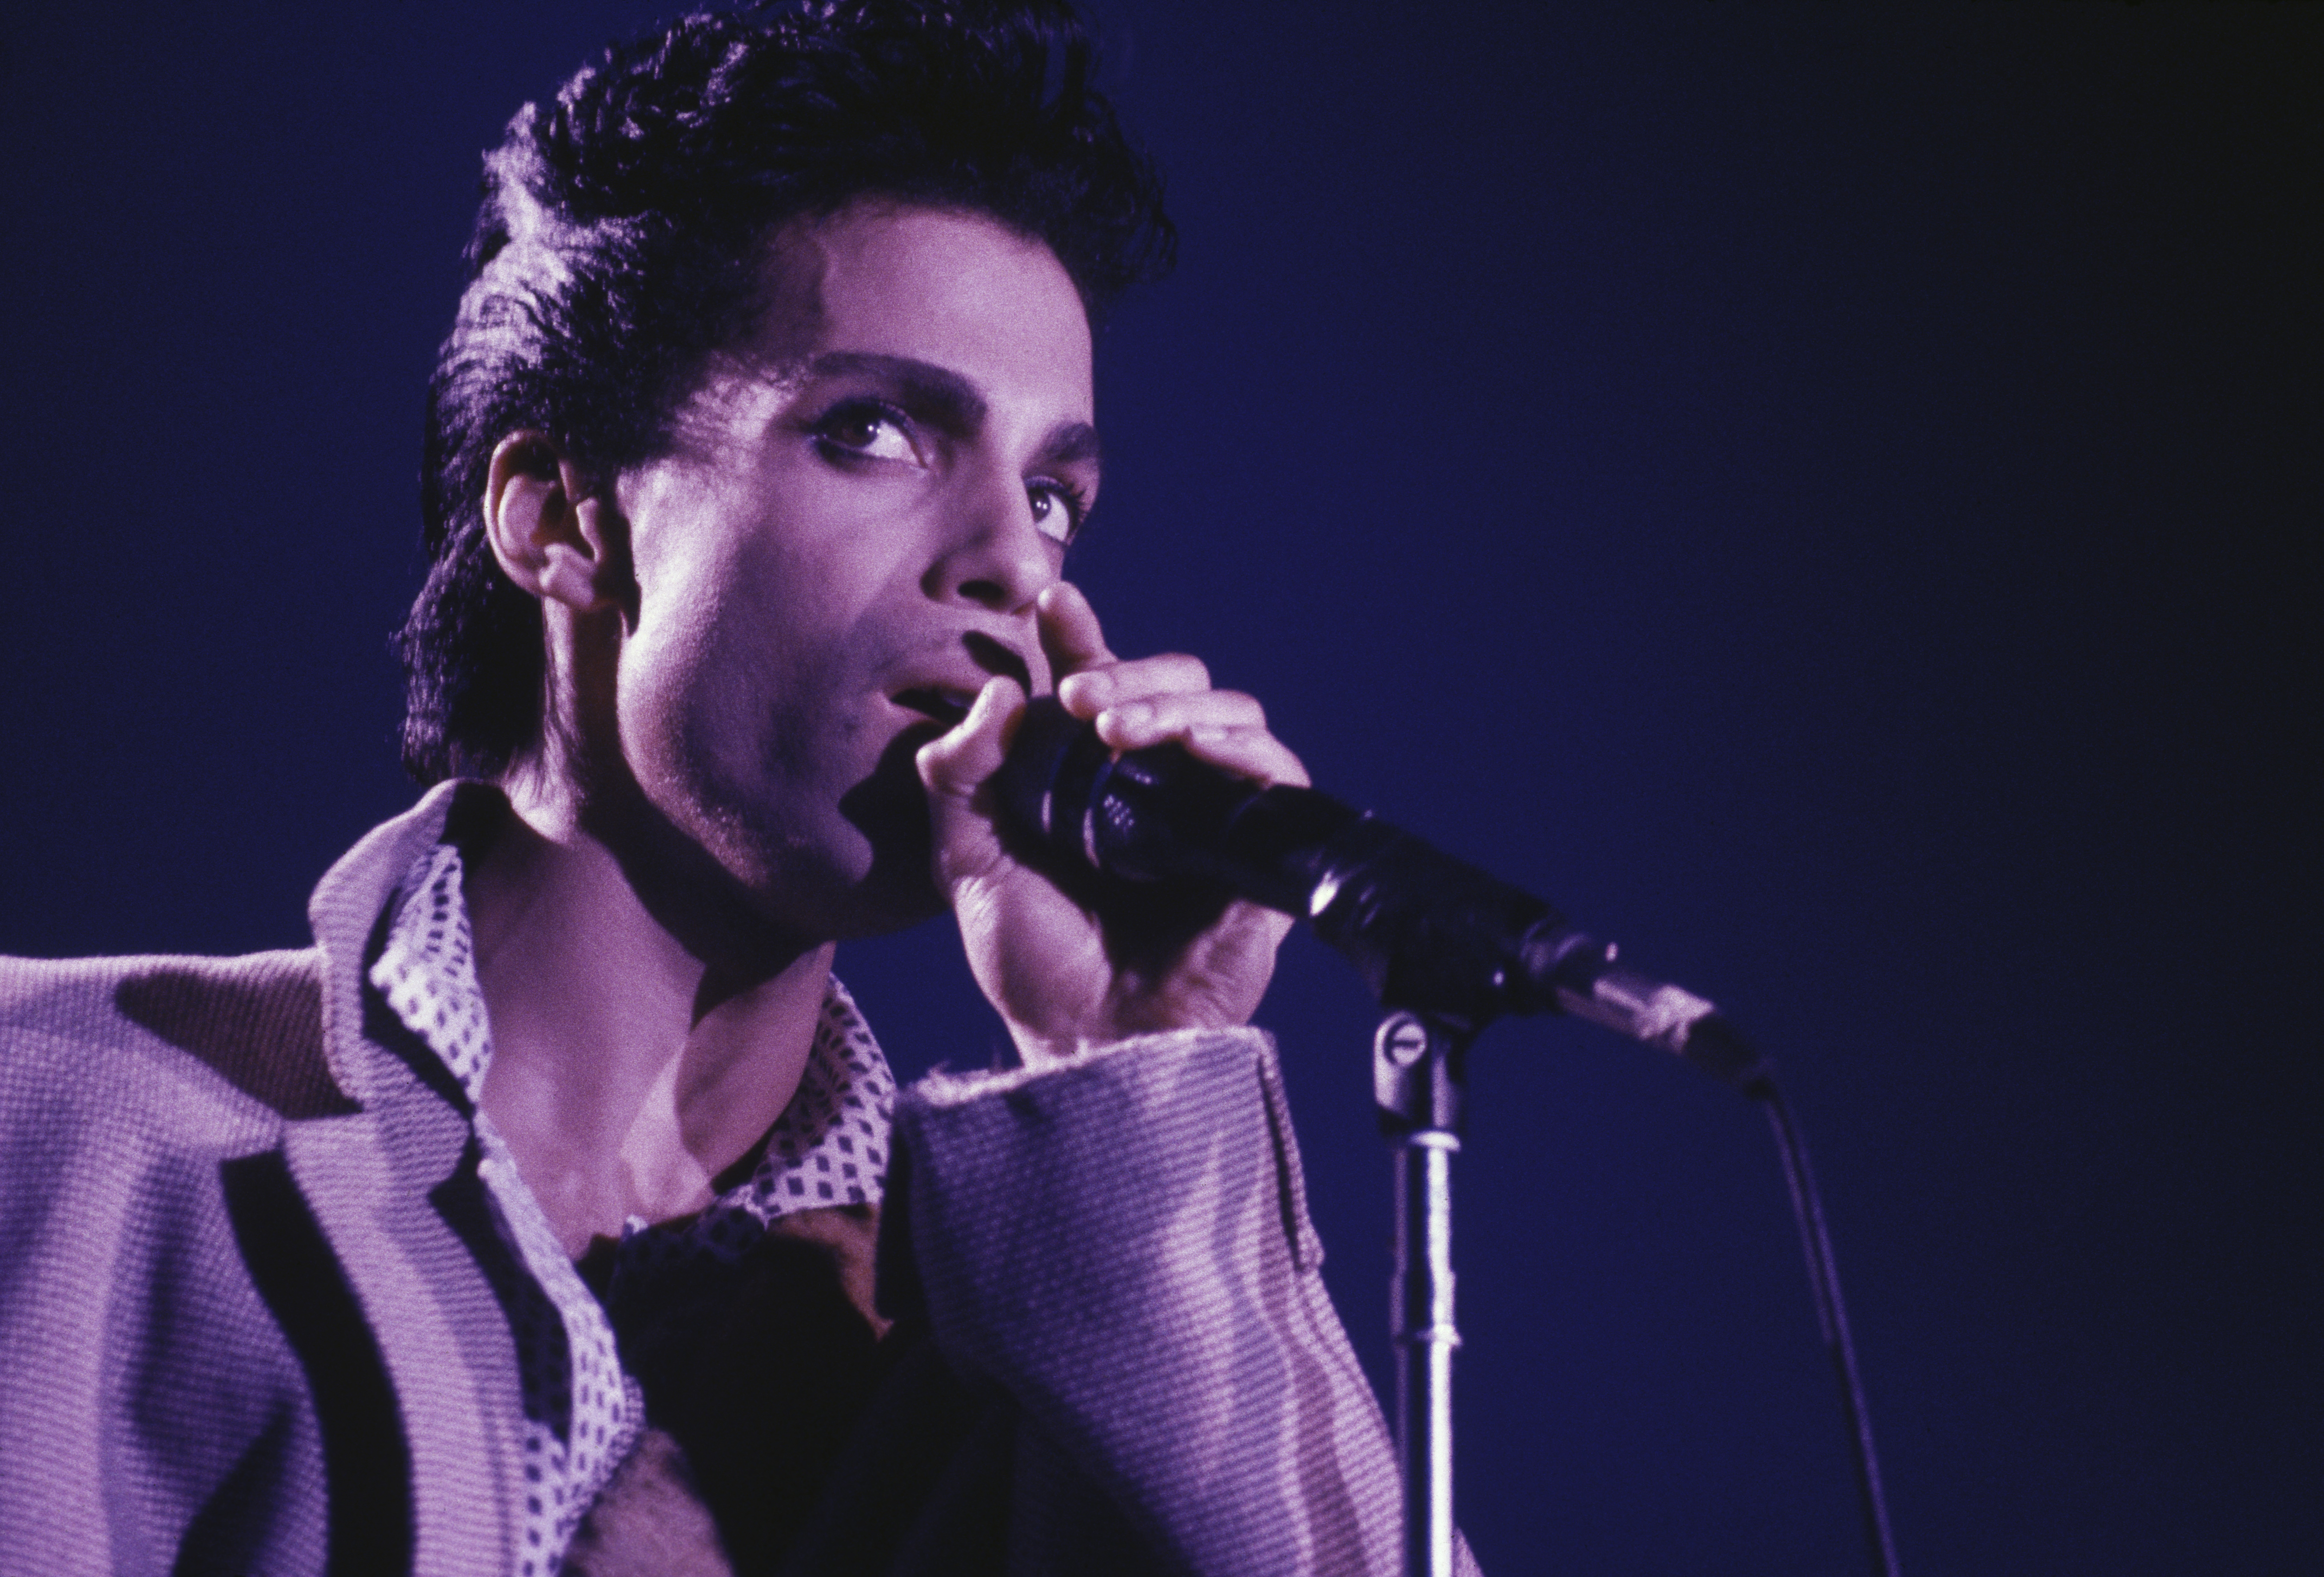 Prince performing during the Hit N Run-Parade tour in August 1986 in Wembley Arena, London | Source: Getty Images